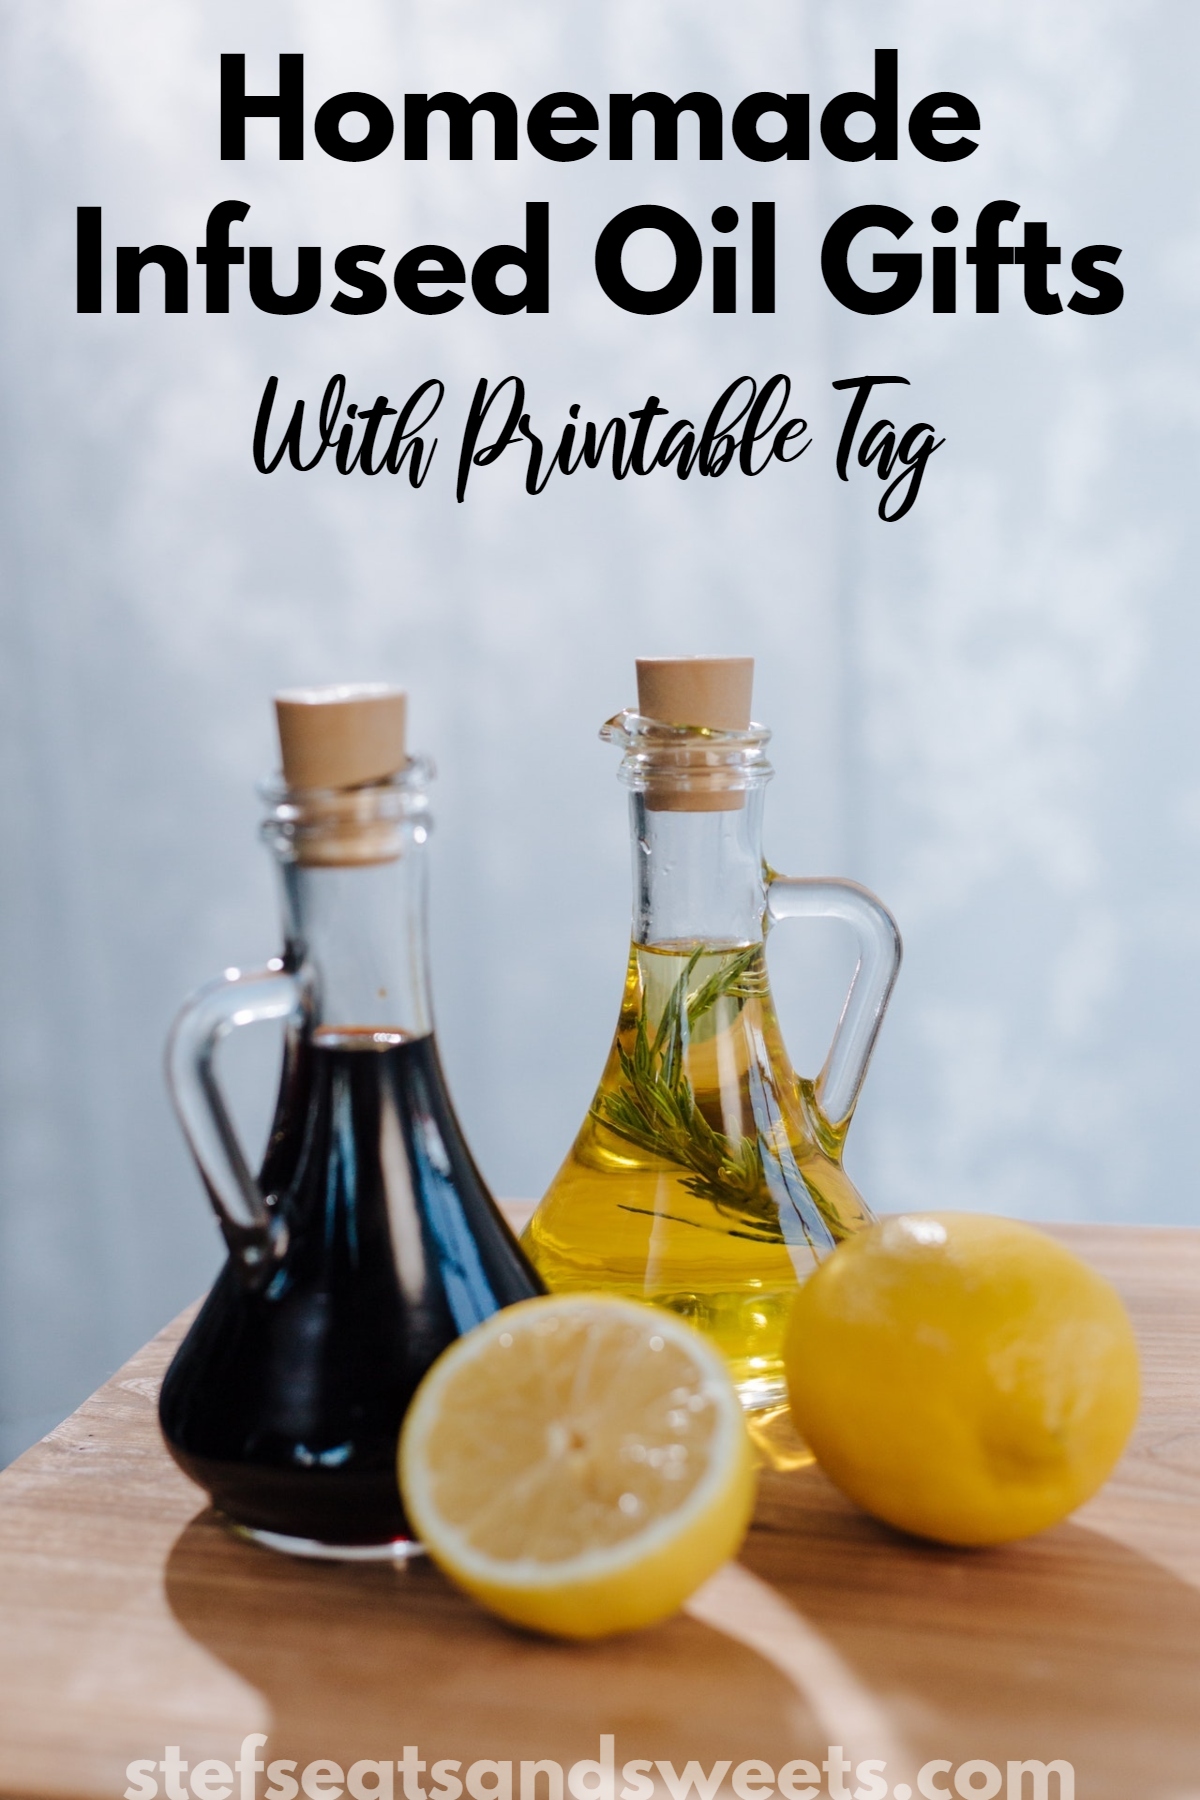 Homemade Infused Olive Oil Gifts 